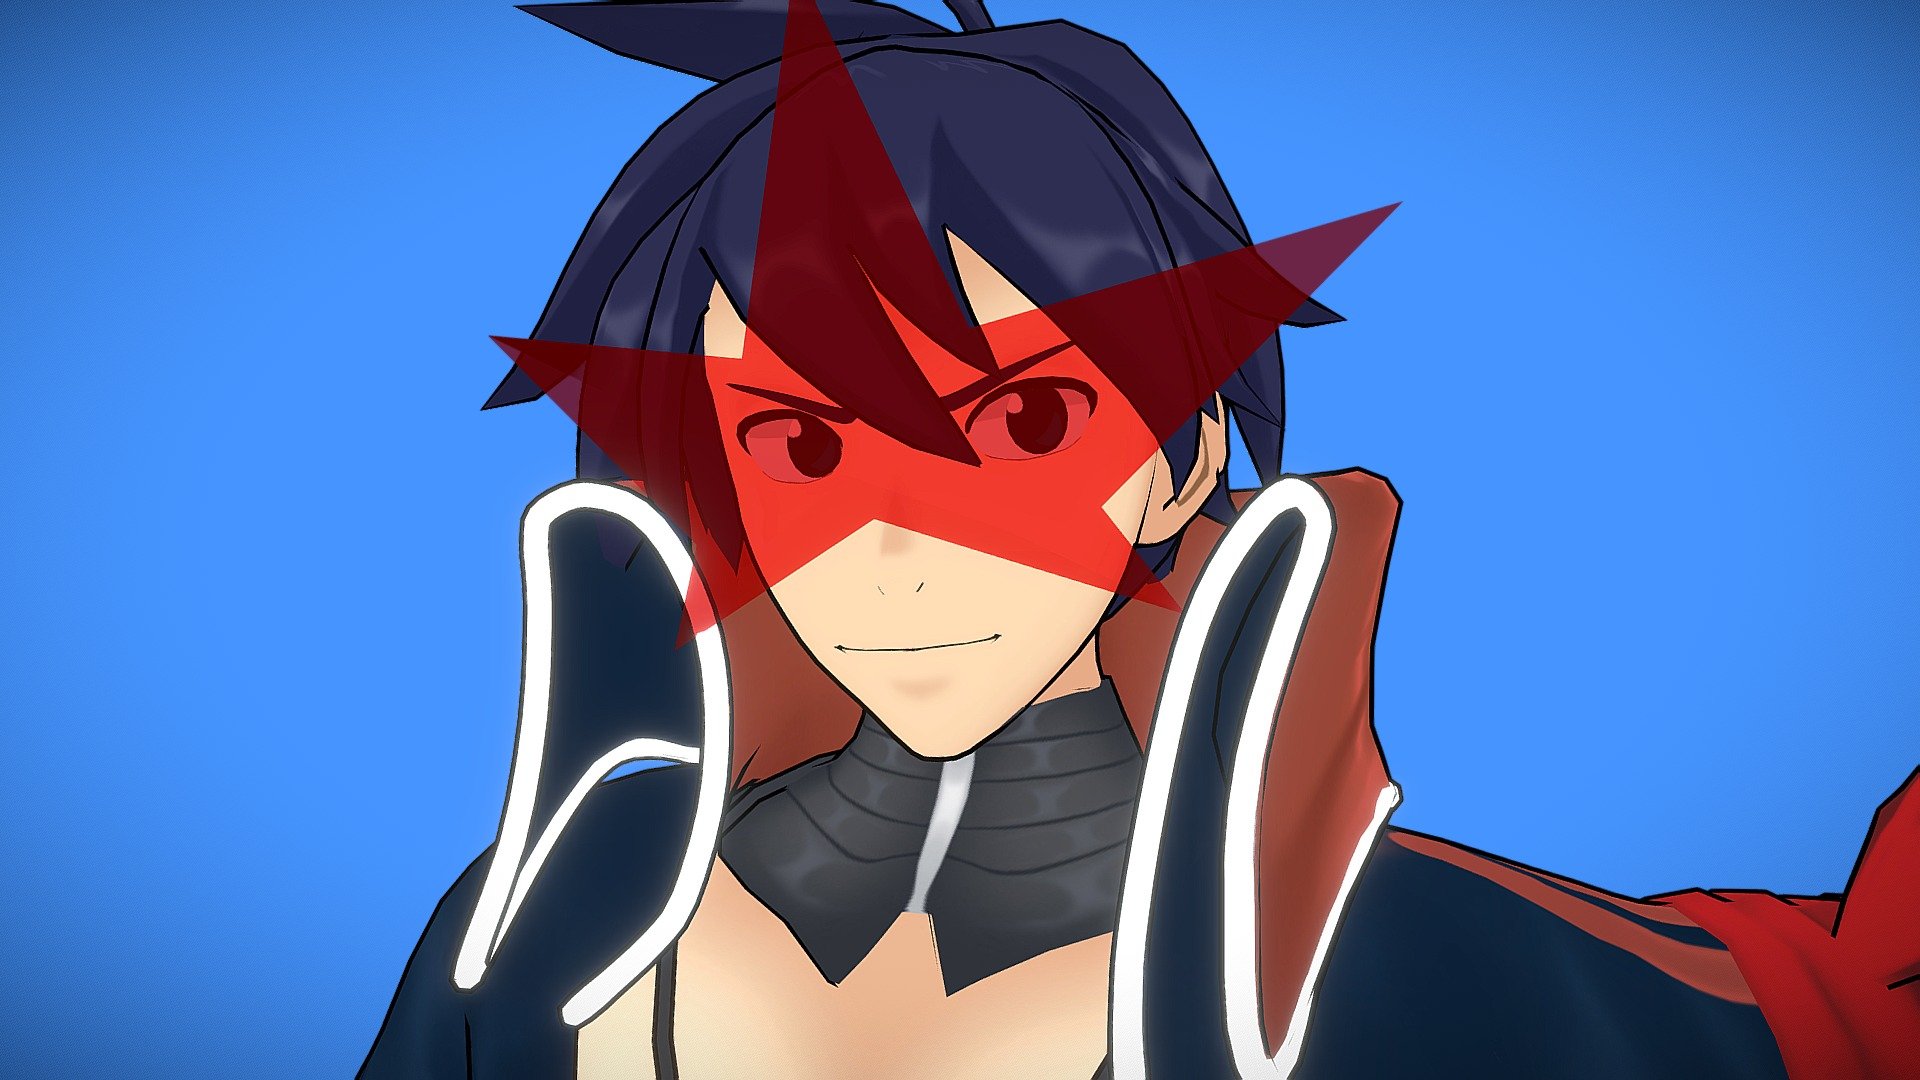 This was a VRChat commission for: https://twitter.com/SpeedBagel

Textures by: https://twitter.com/AnGxIx

Simon from the anime Tengen Toppa Gurren Lagann - Simon The Digger - Gurren Lagann - 3D model by VeXx (@risingvexx) 3d model